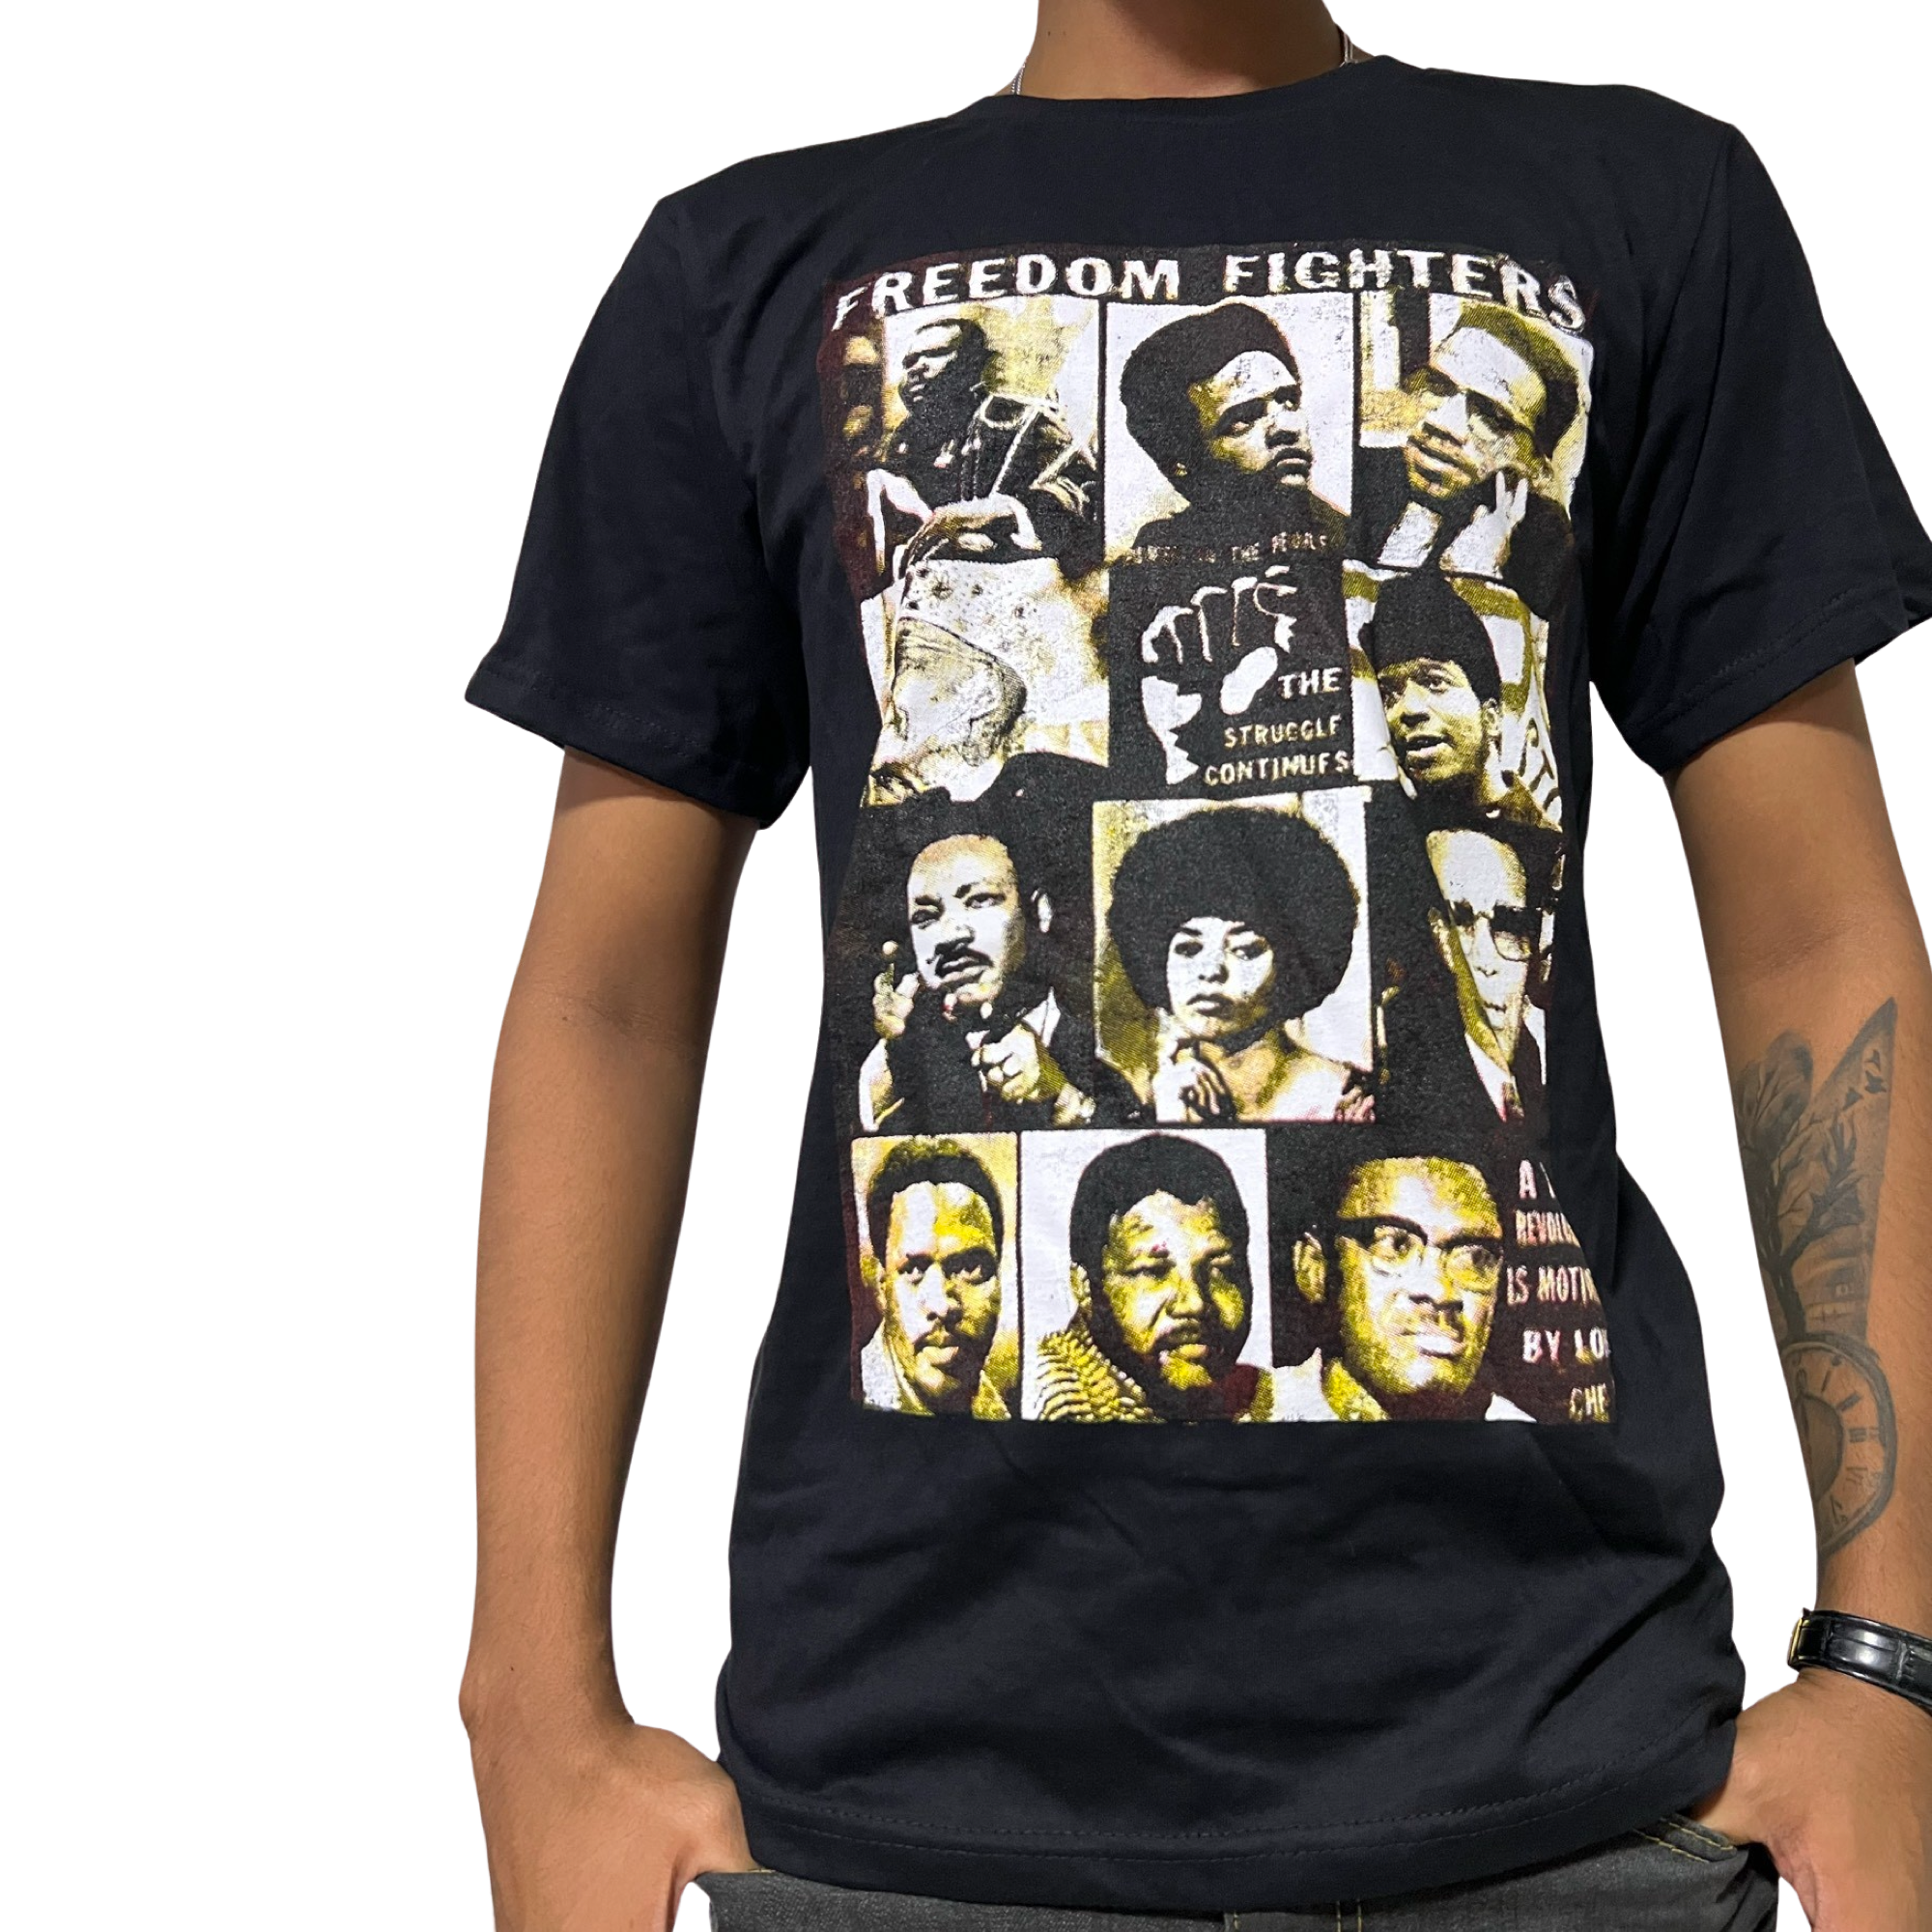 Freedom Fighter T-Shirt.